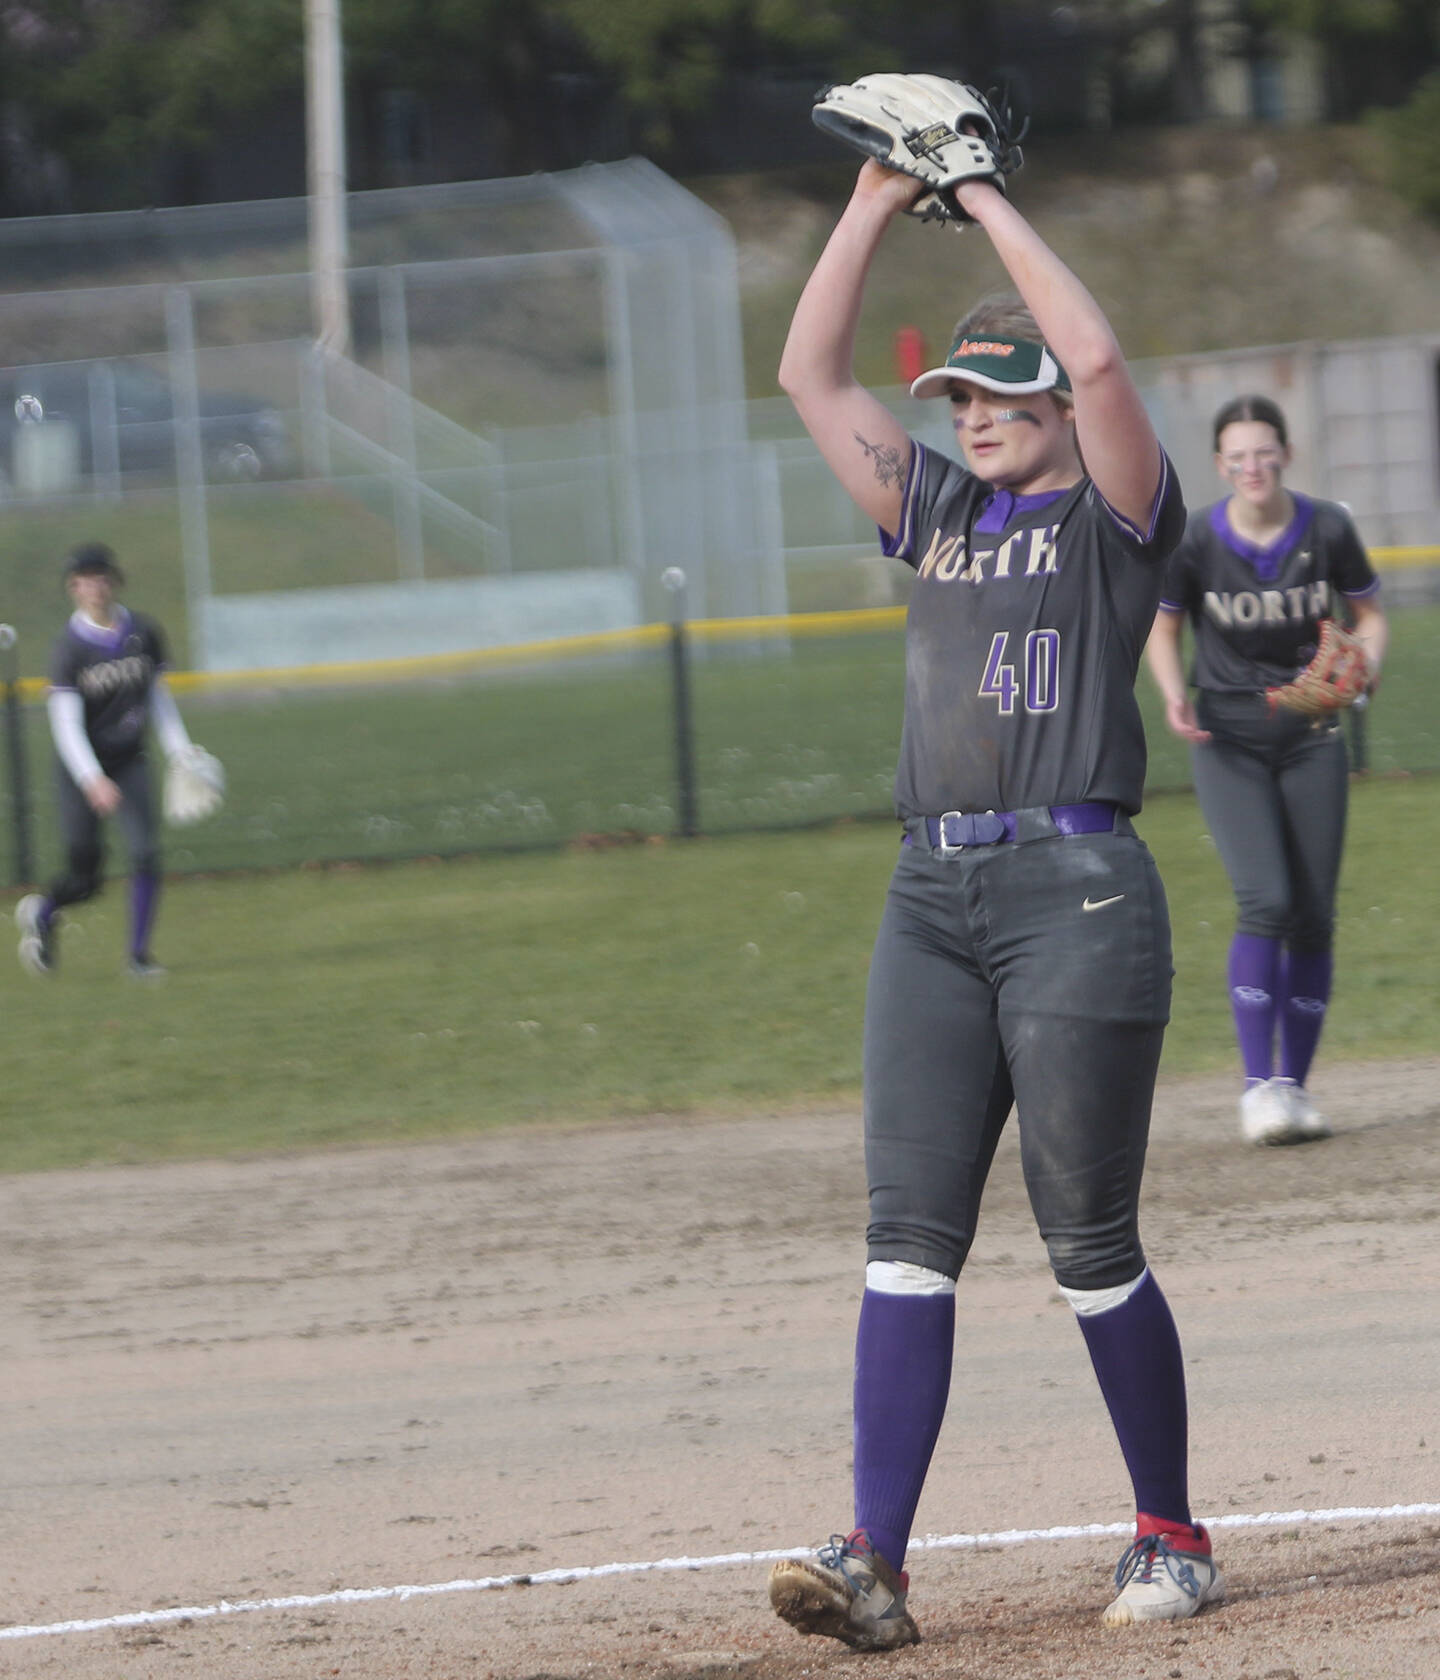 Makayla Stockman winds up to pitch for the Vikings. Steve Powell/File Photos